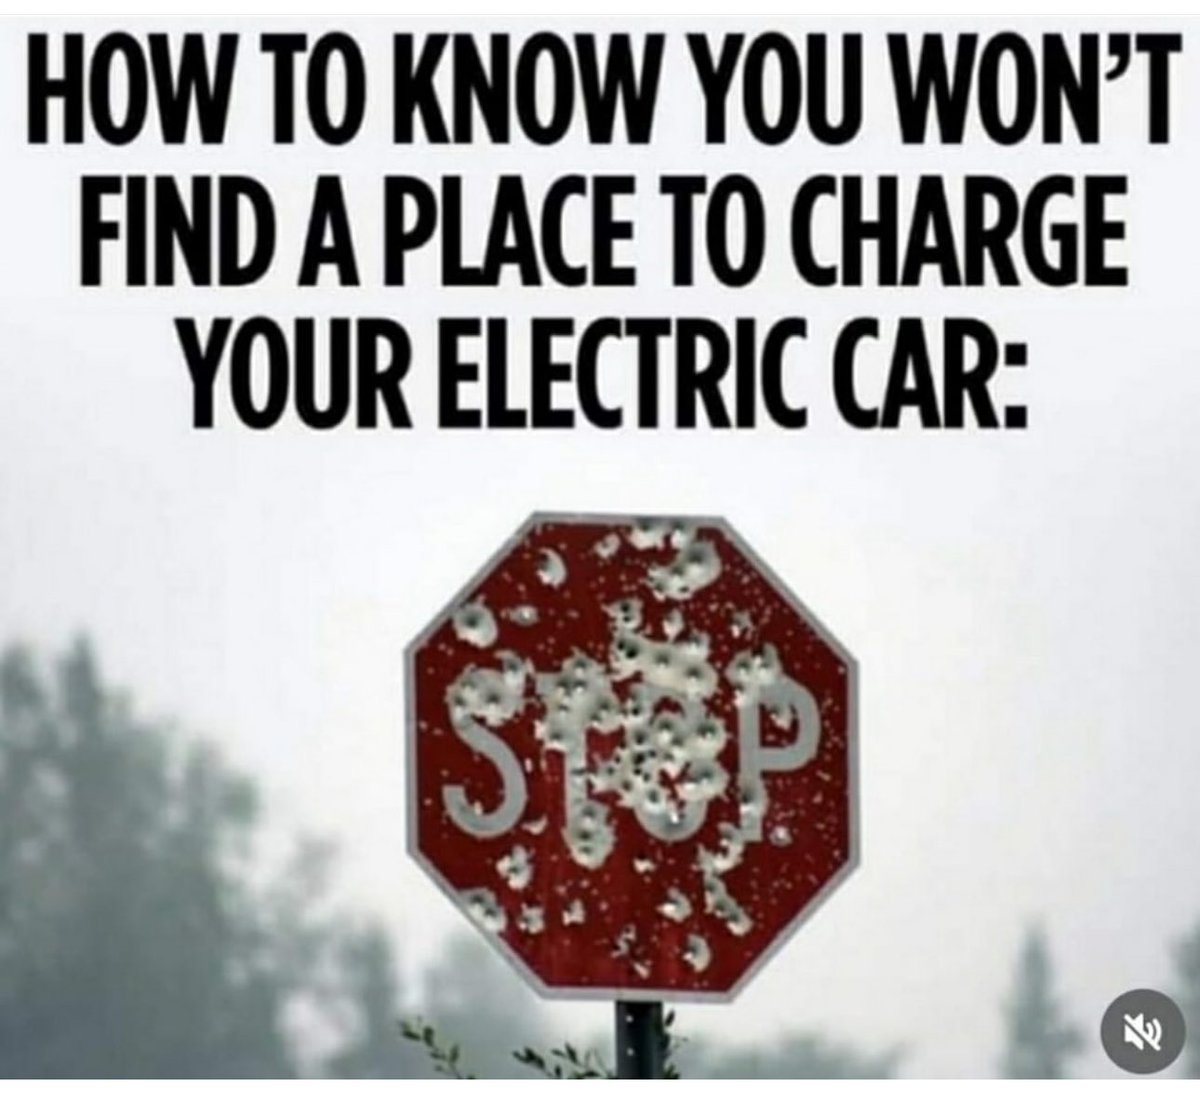 Tip for #ElectricCars owners.